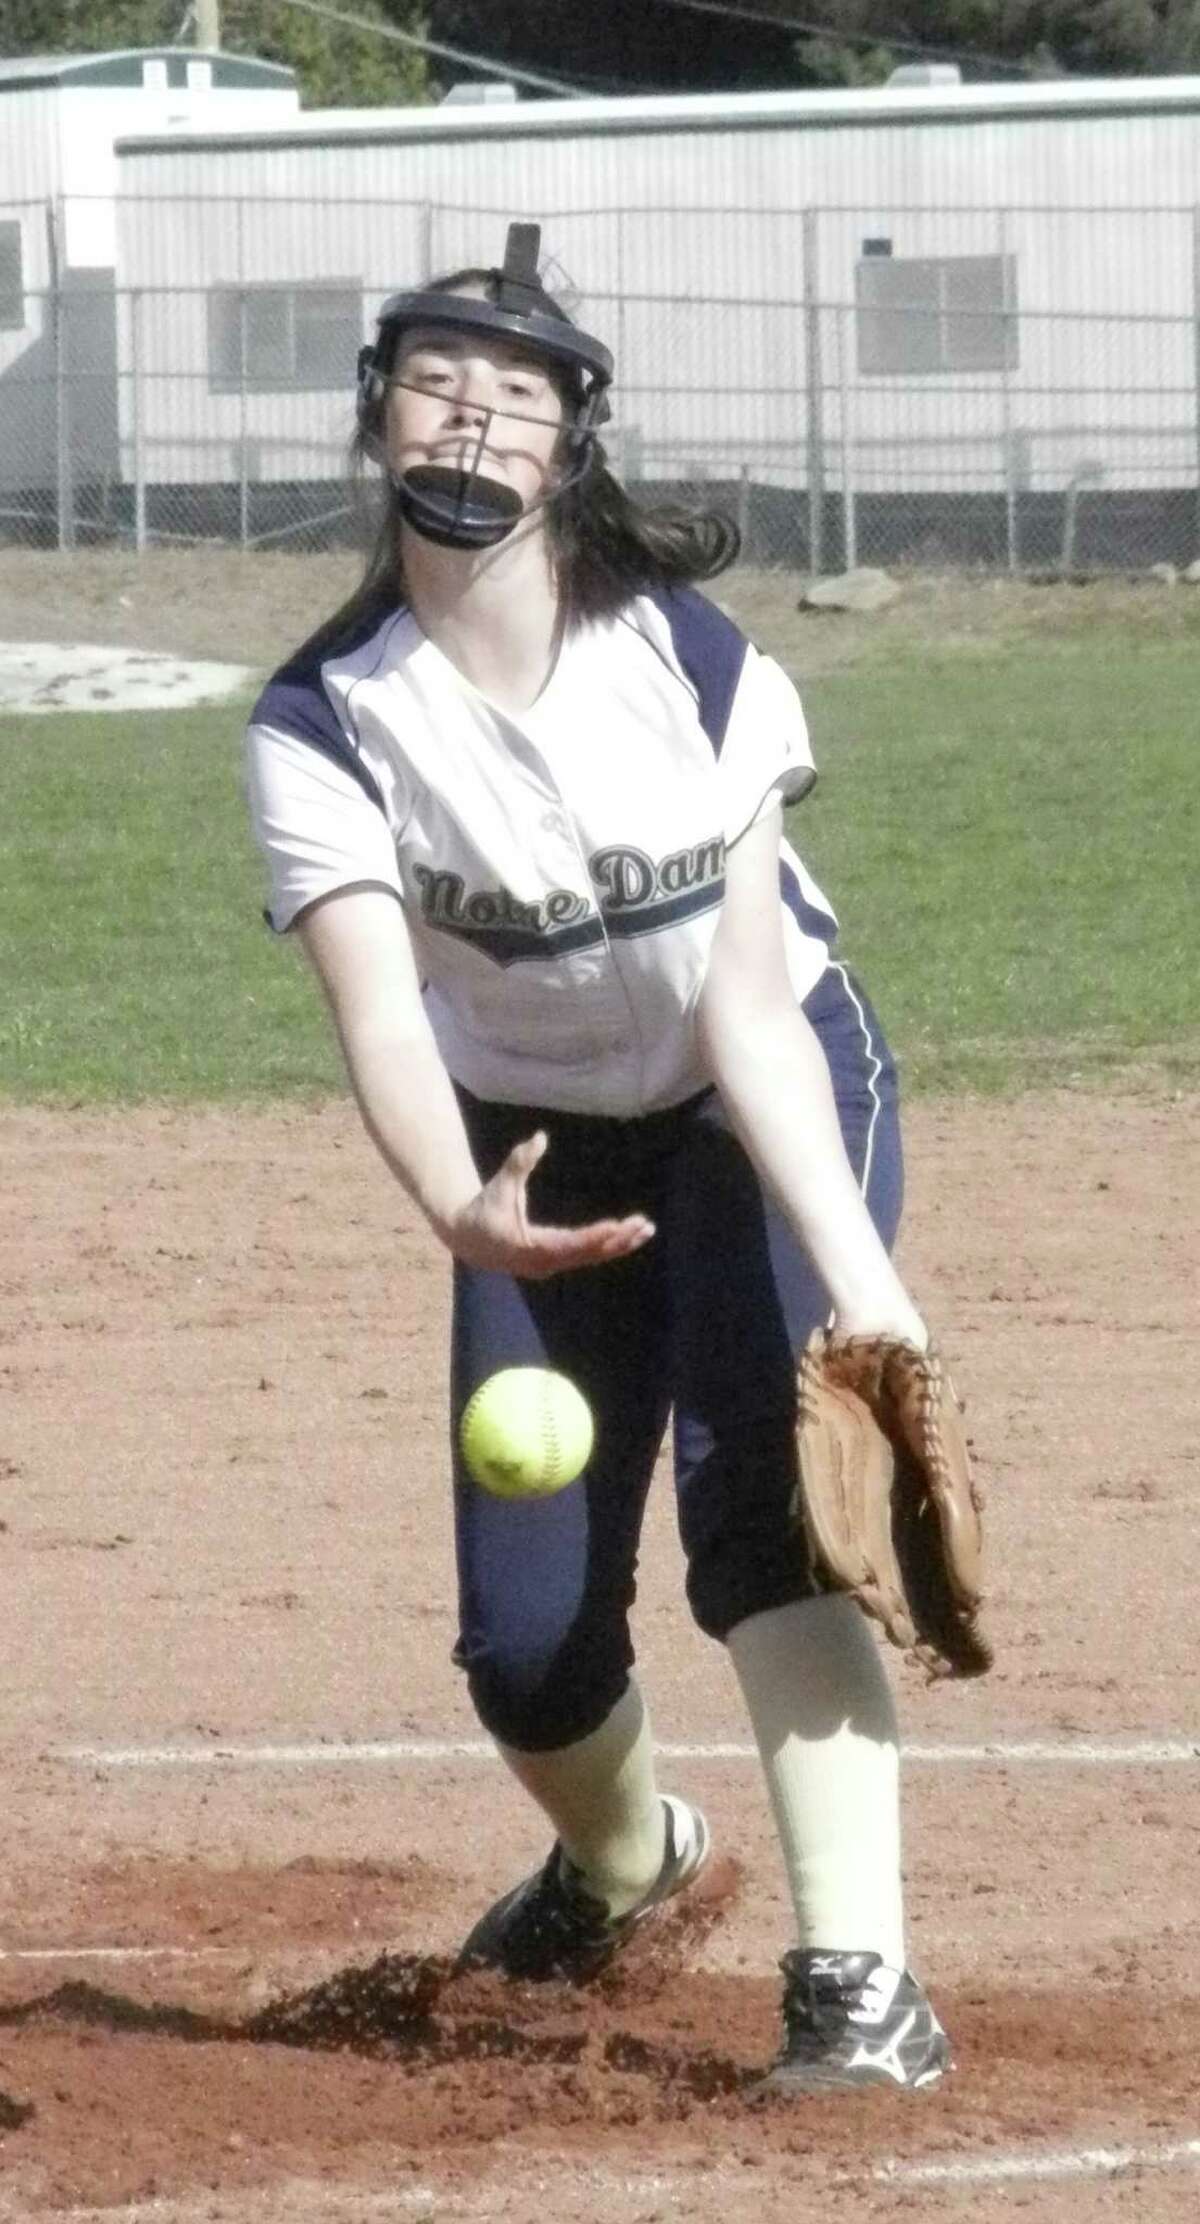 Notre Dame-Fairfield freshman Shelby Nolan unleashes a pitch against Oxford on Monday, April 28 in an SWC Patriot Division softball game in Fairfield. Oxford won 5-1 and Nolan, ordinarily the Lancers' second baseman, made her first career start.